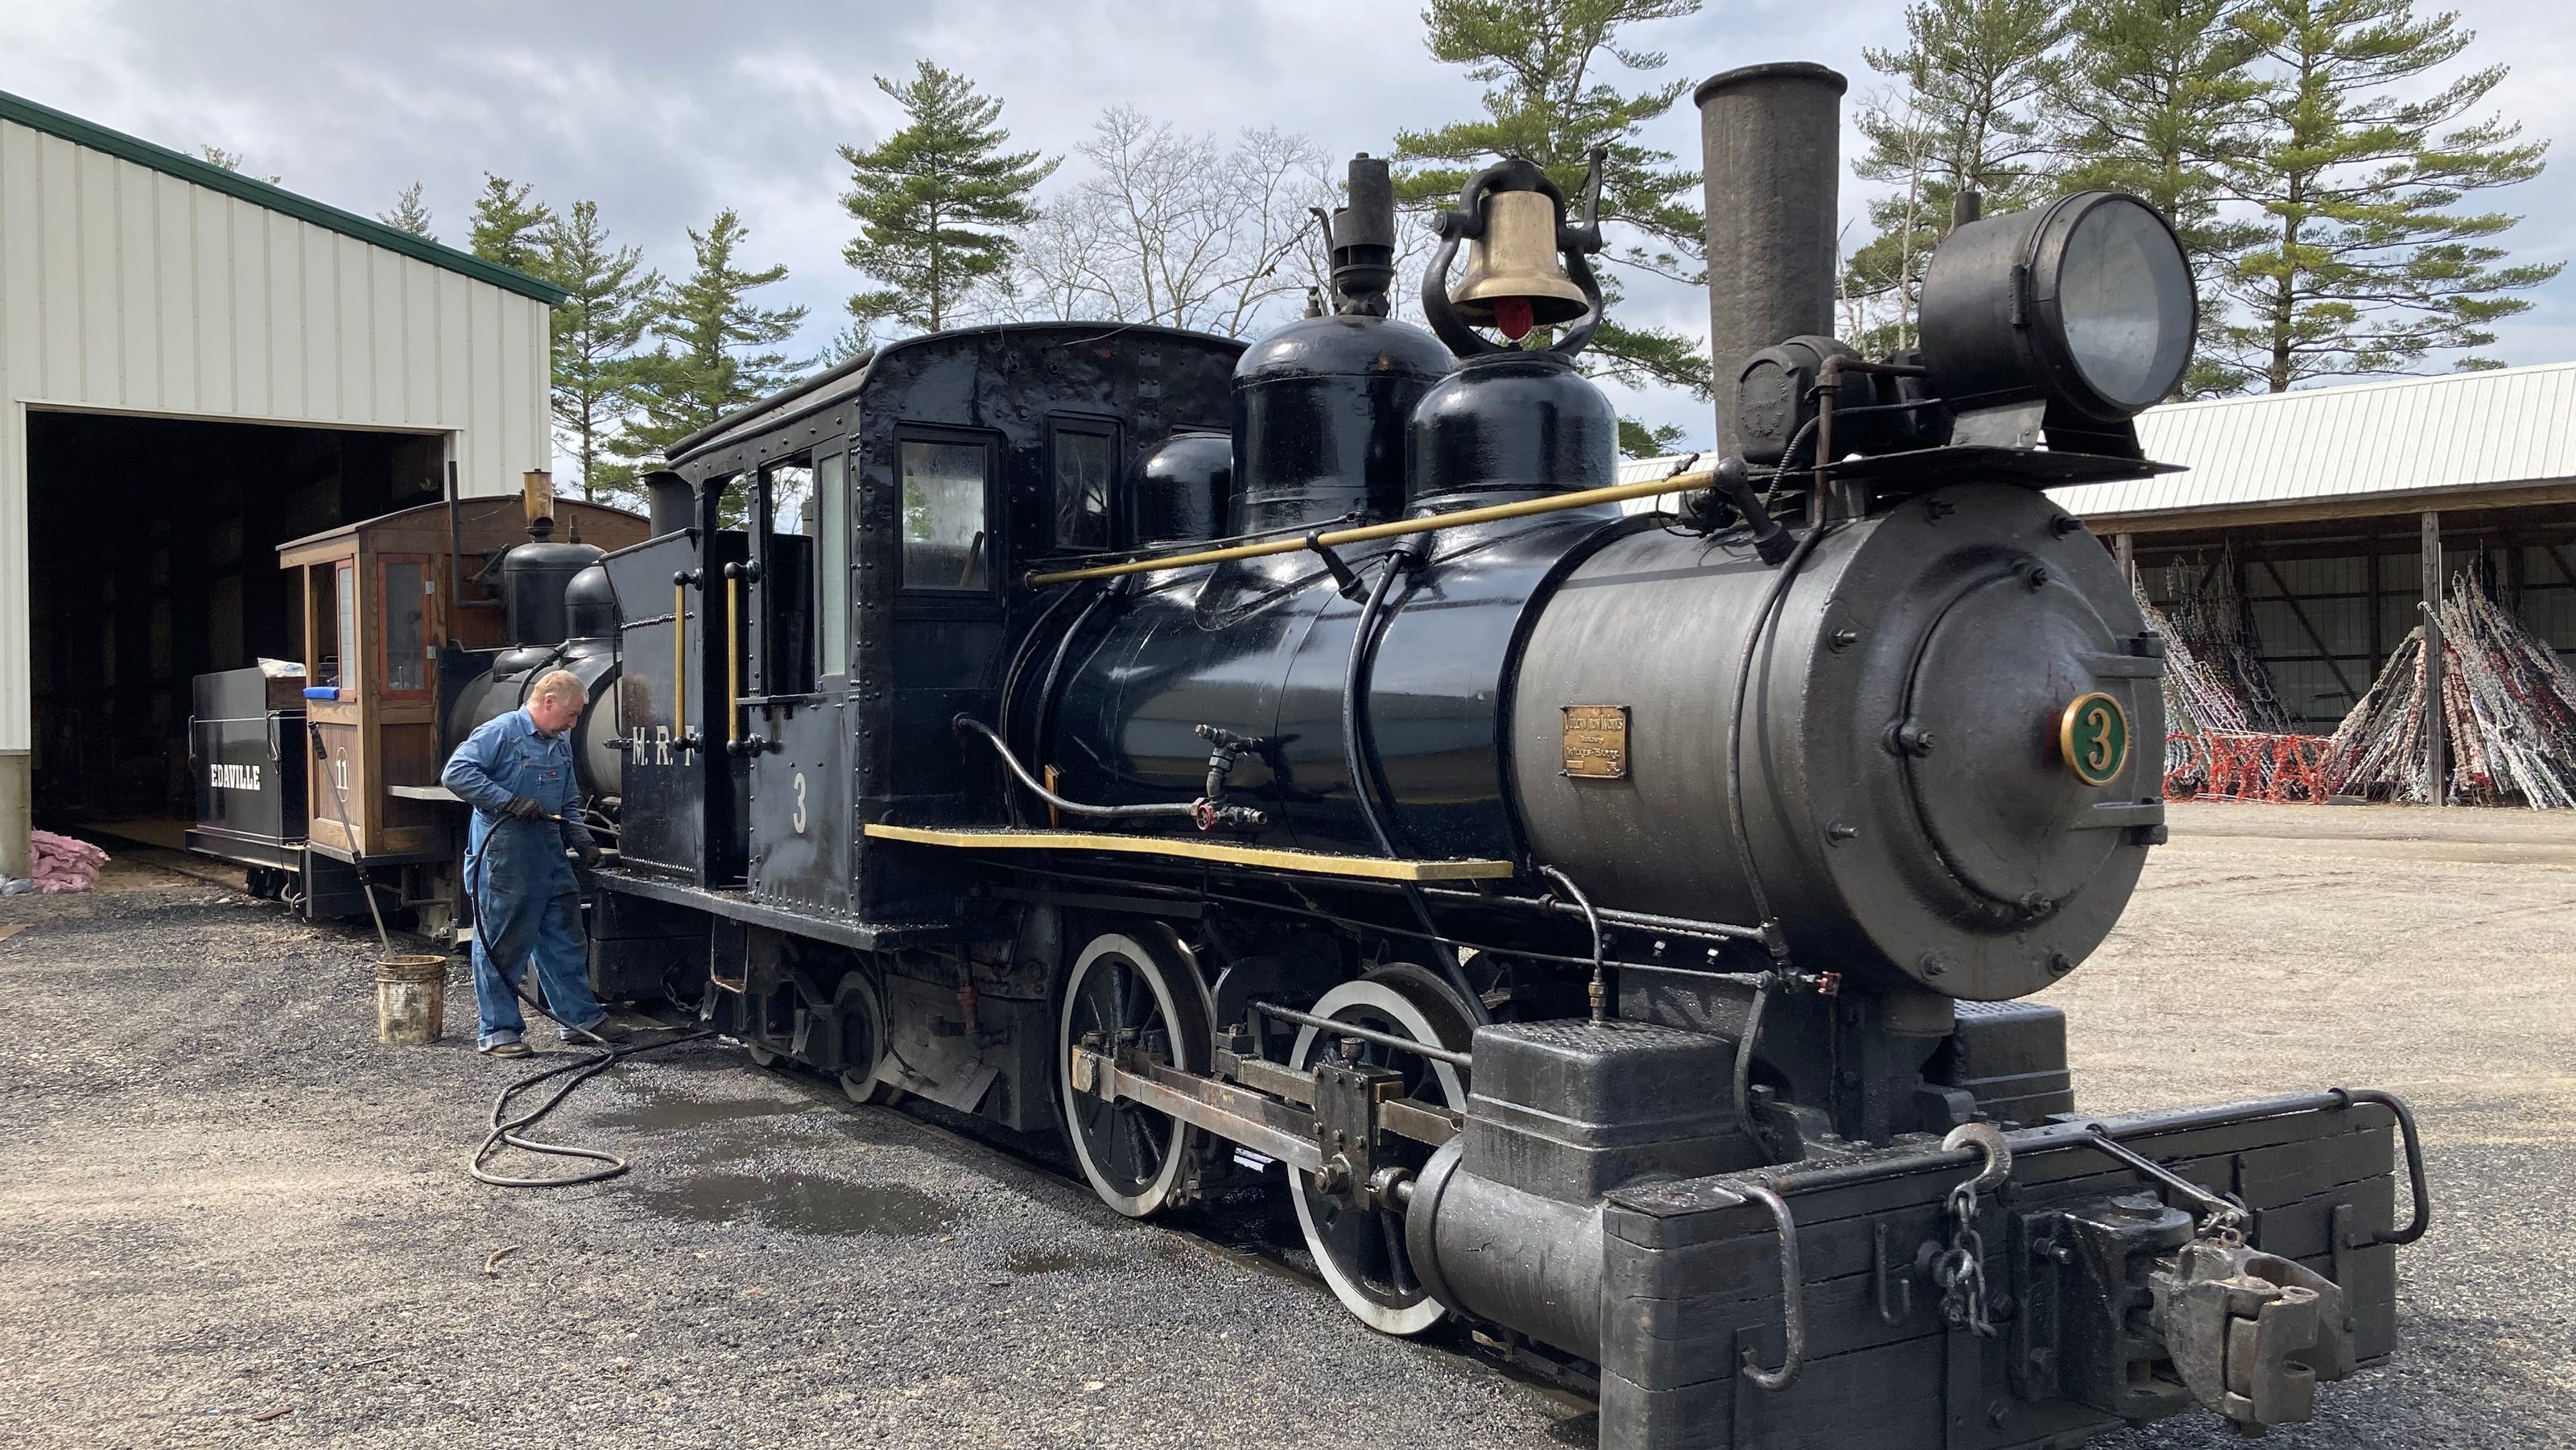 Celebrate 75 years since completion of Edaville Railroad in Carver